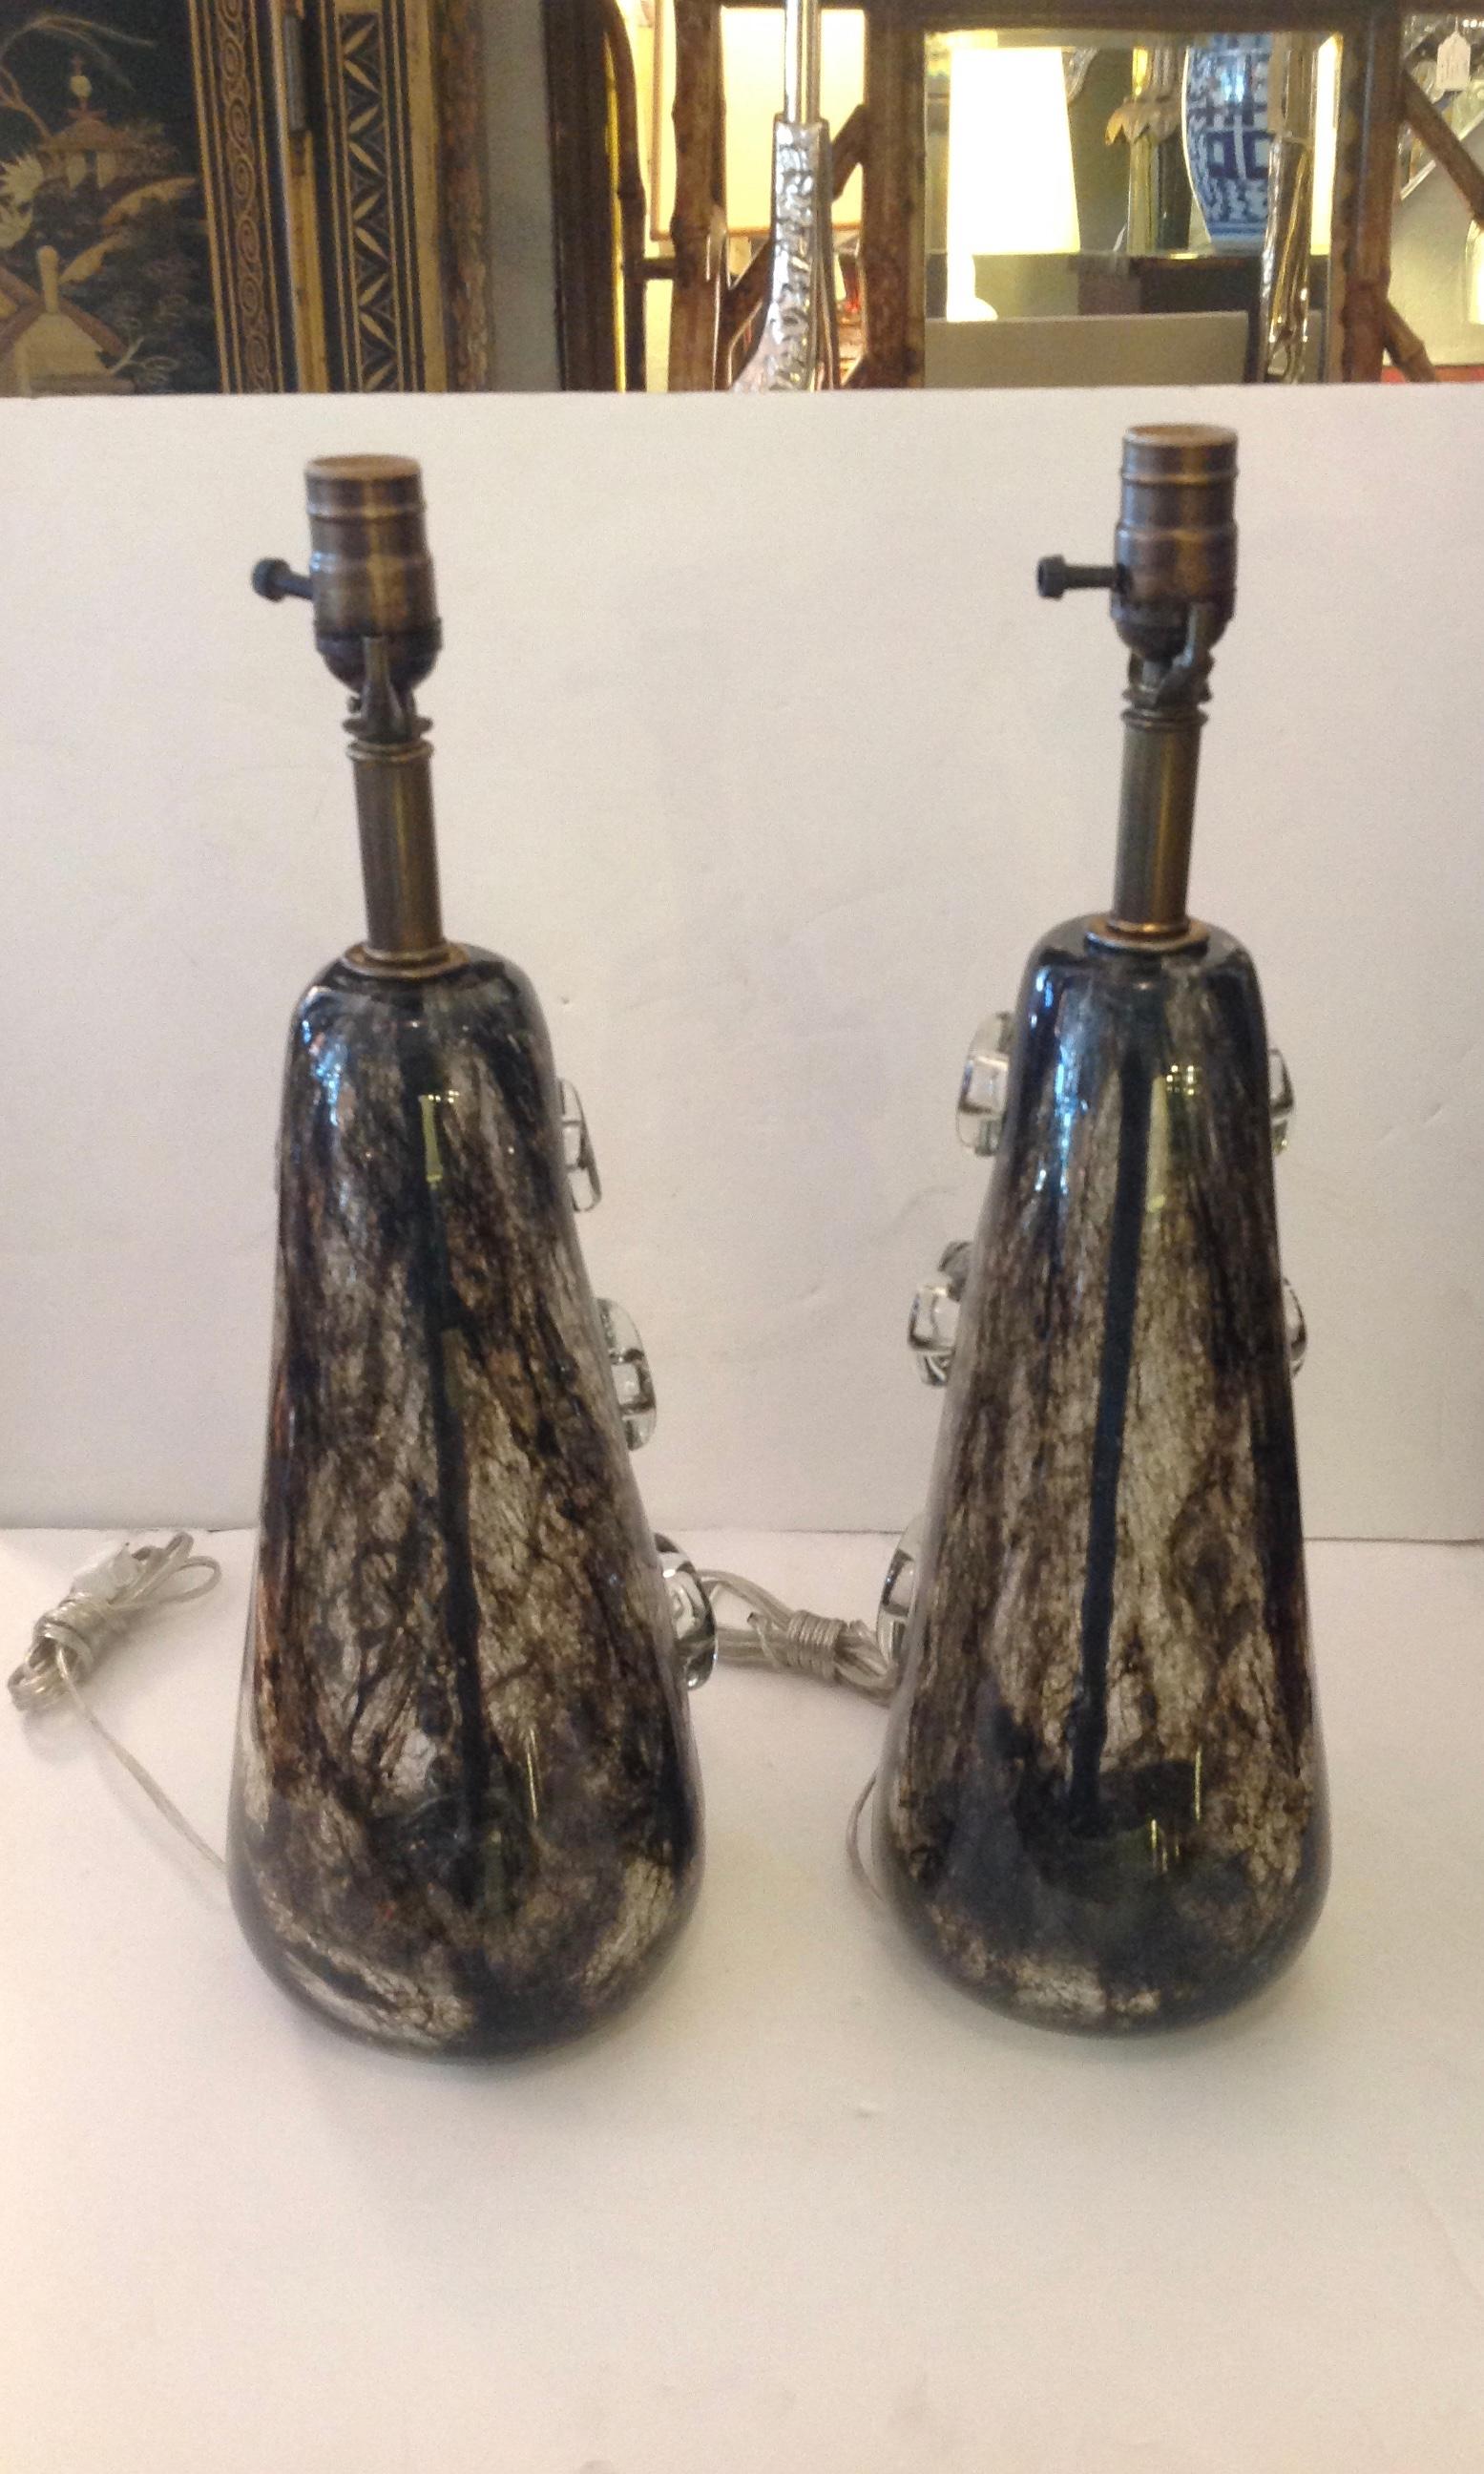 Rare Pair of Ercole Barovier Crepuscolo Glass Lamps 1